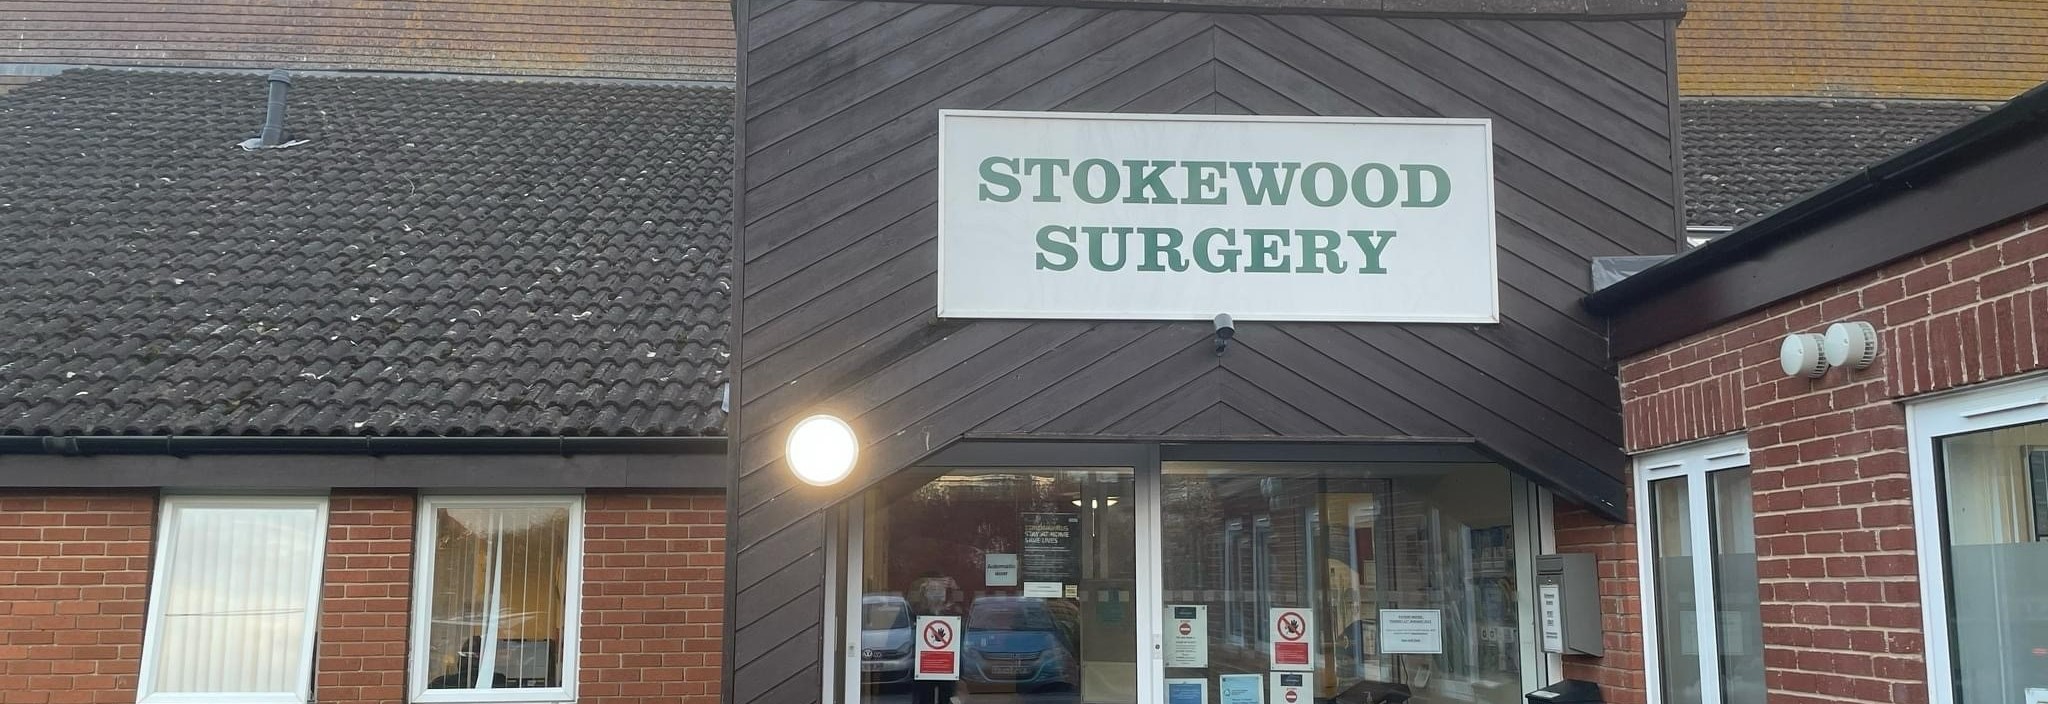 covid 19 treatments community stokewood surgery vision article